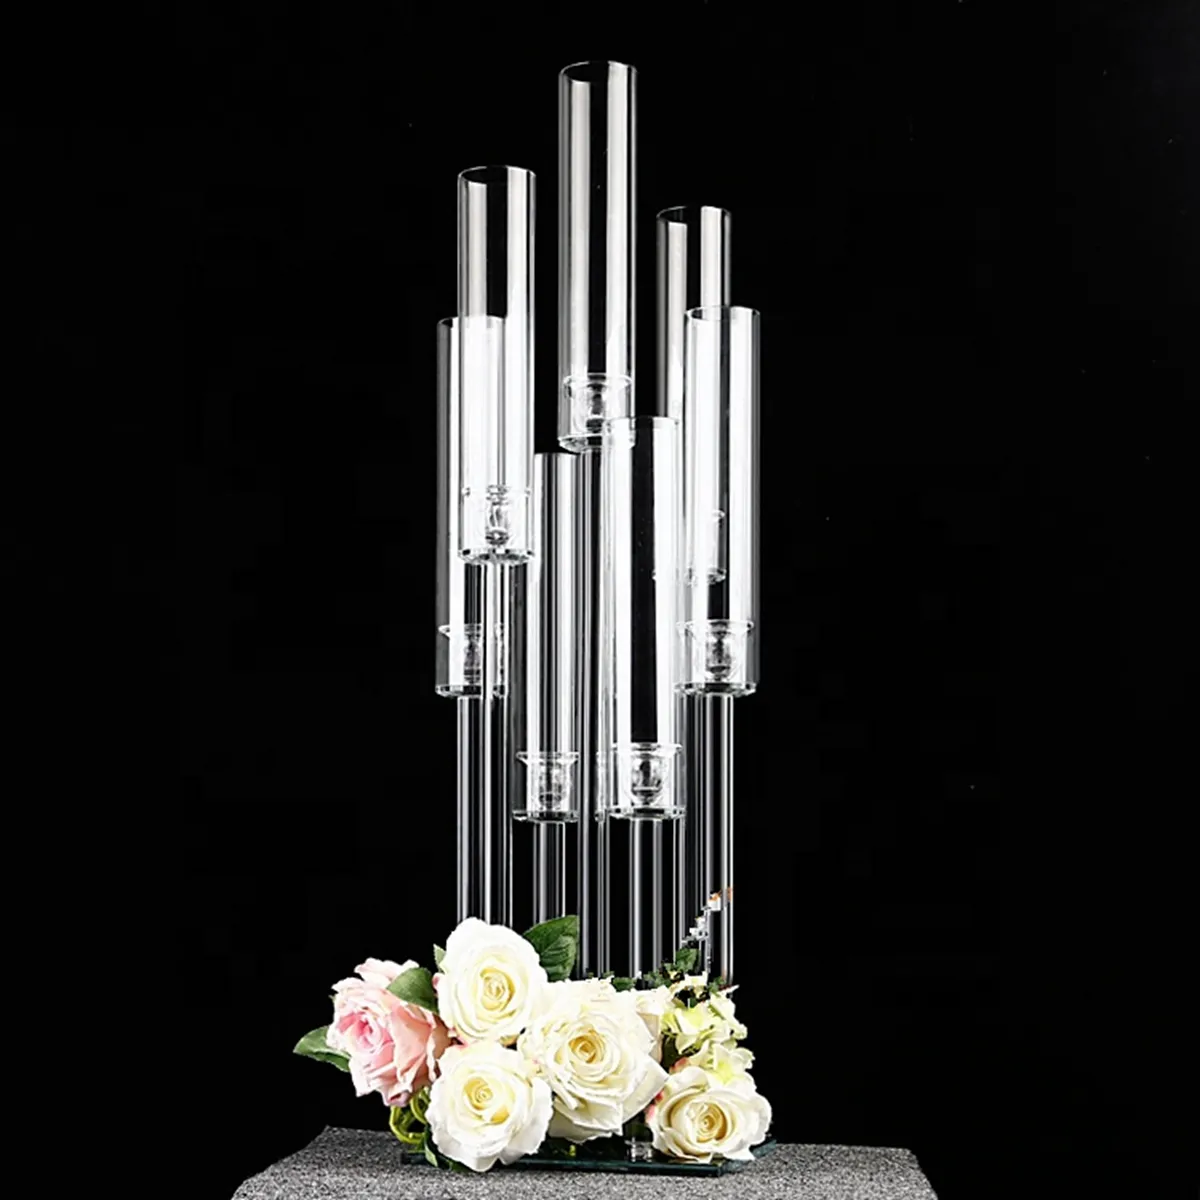 For Led candle)Table decoration centerpieces 9 arm taper candleholder tall clear acrylic crystal base tubes wedding candelabra sale used senyu638